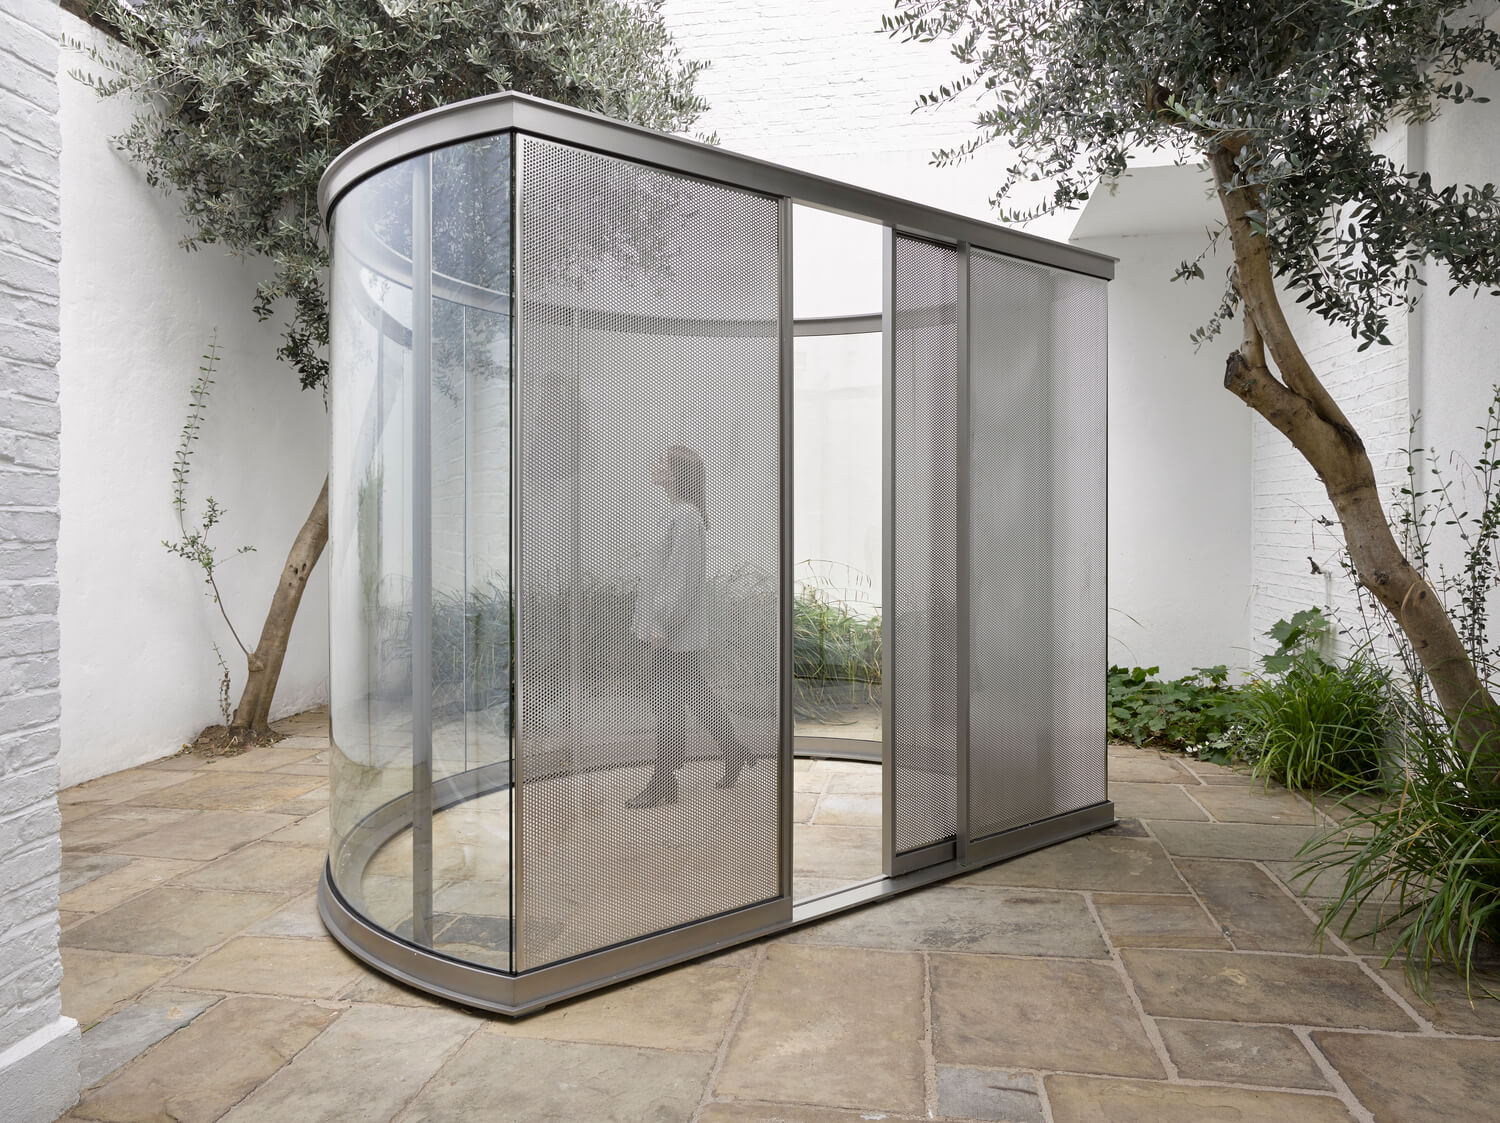 a steel and glass semicircular pavilion on brick